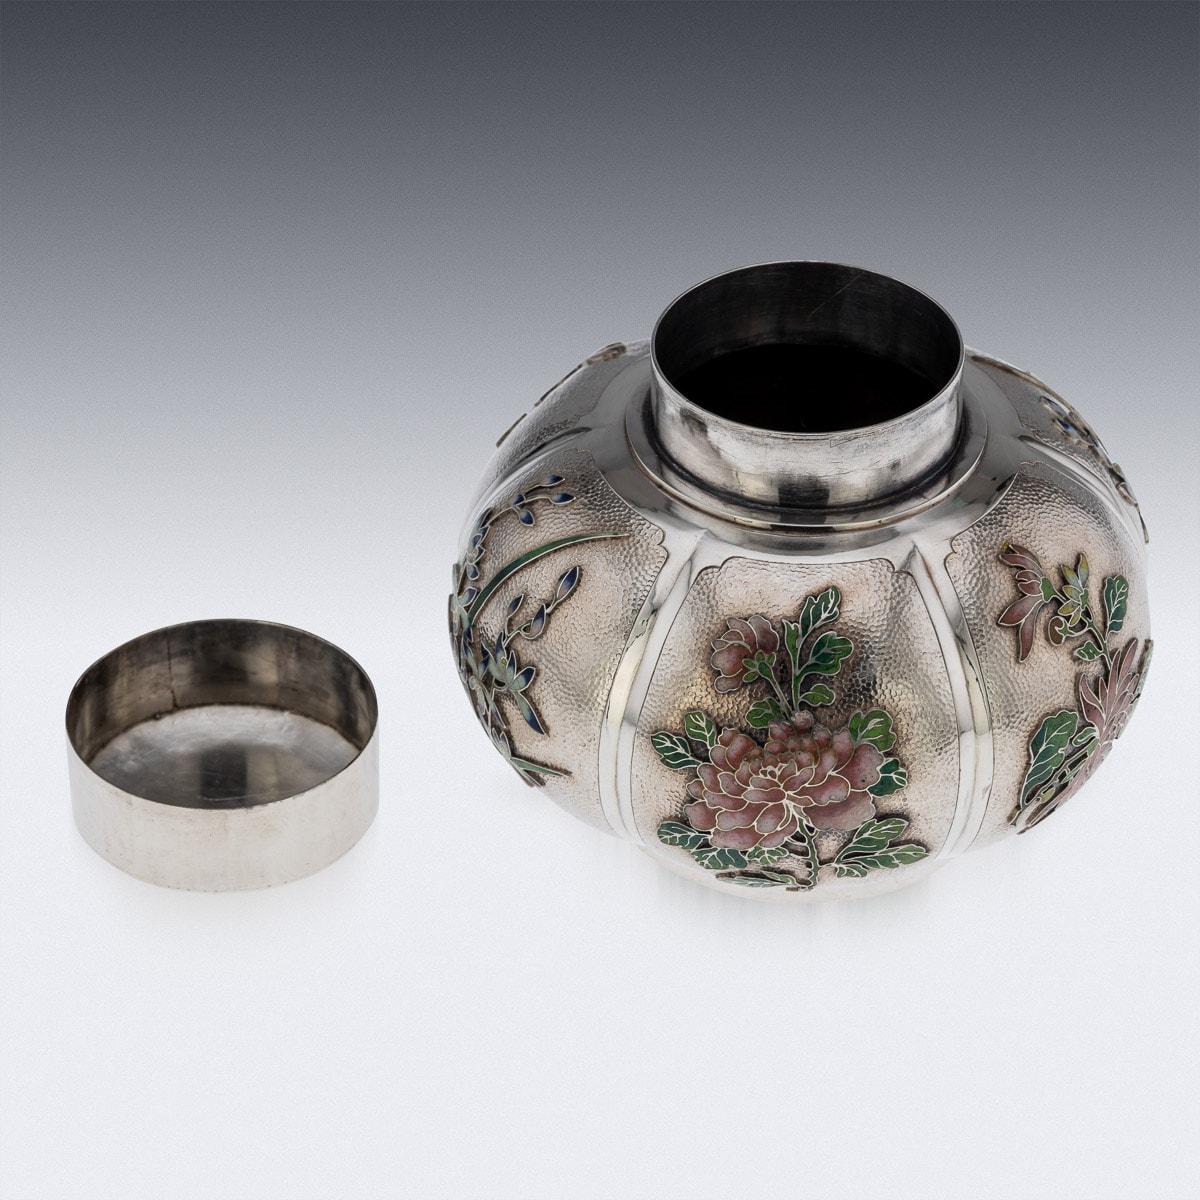 20th Century Chinese Export Solid Silver & Enamel Tea Caddy, Luen Wo, c.1900 3